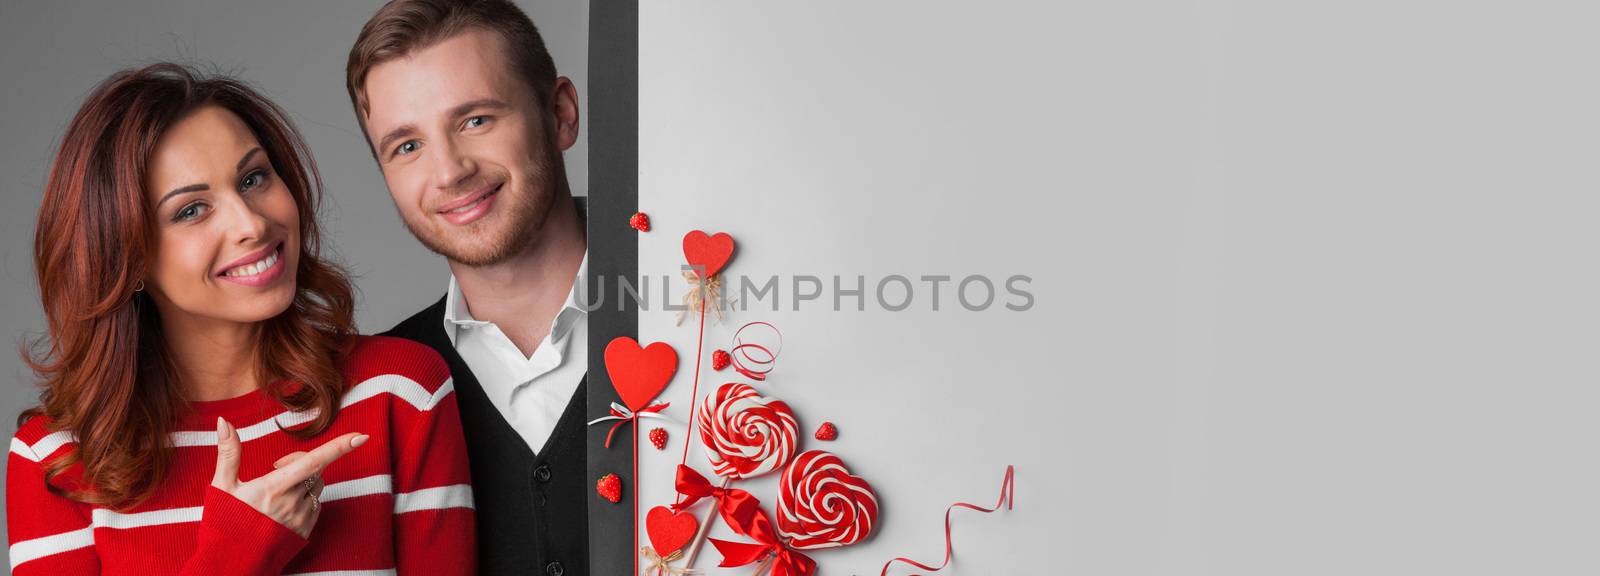 Happy young couple with heart shaped red decoration on white banner background with copy space for text. Valentine's day celebration